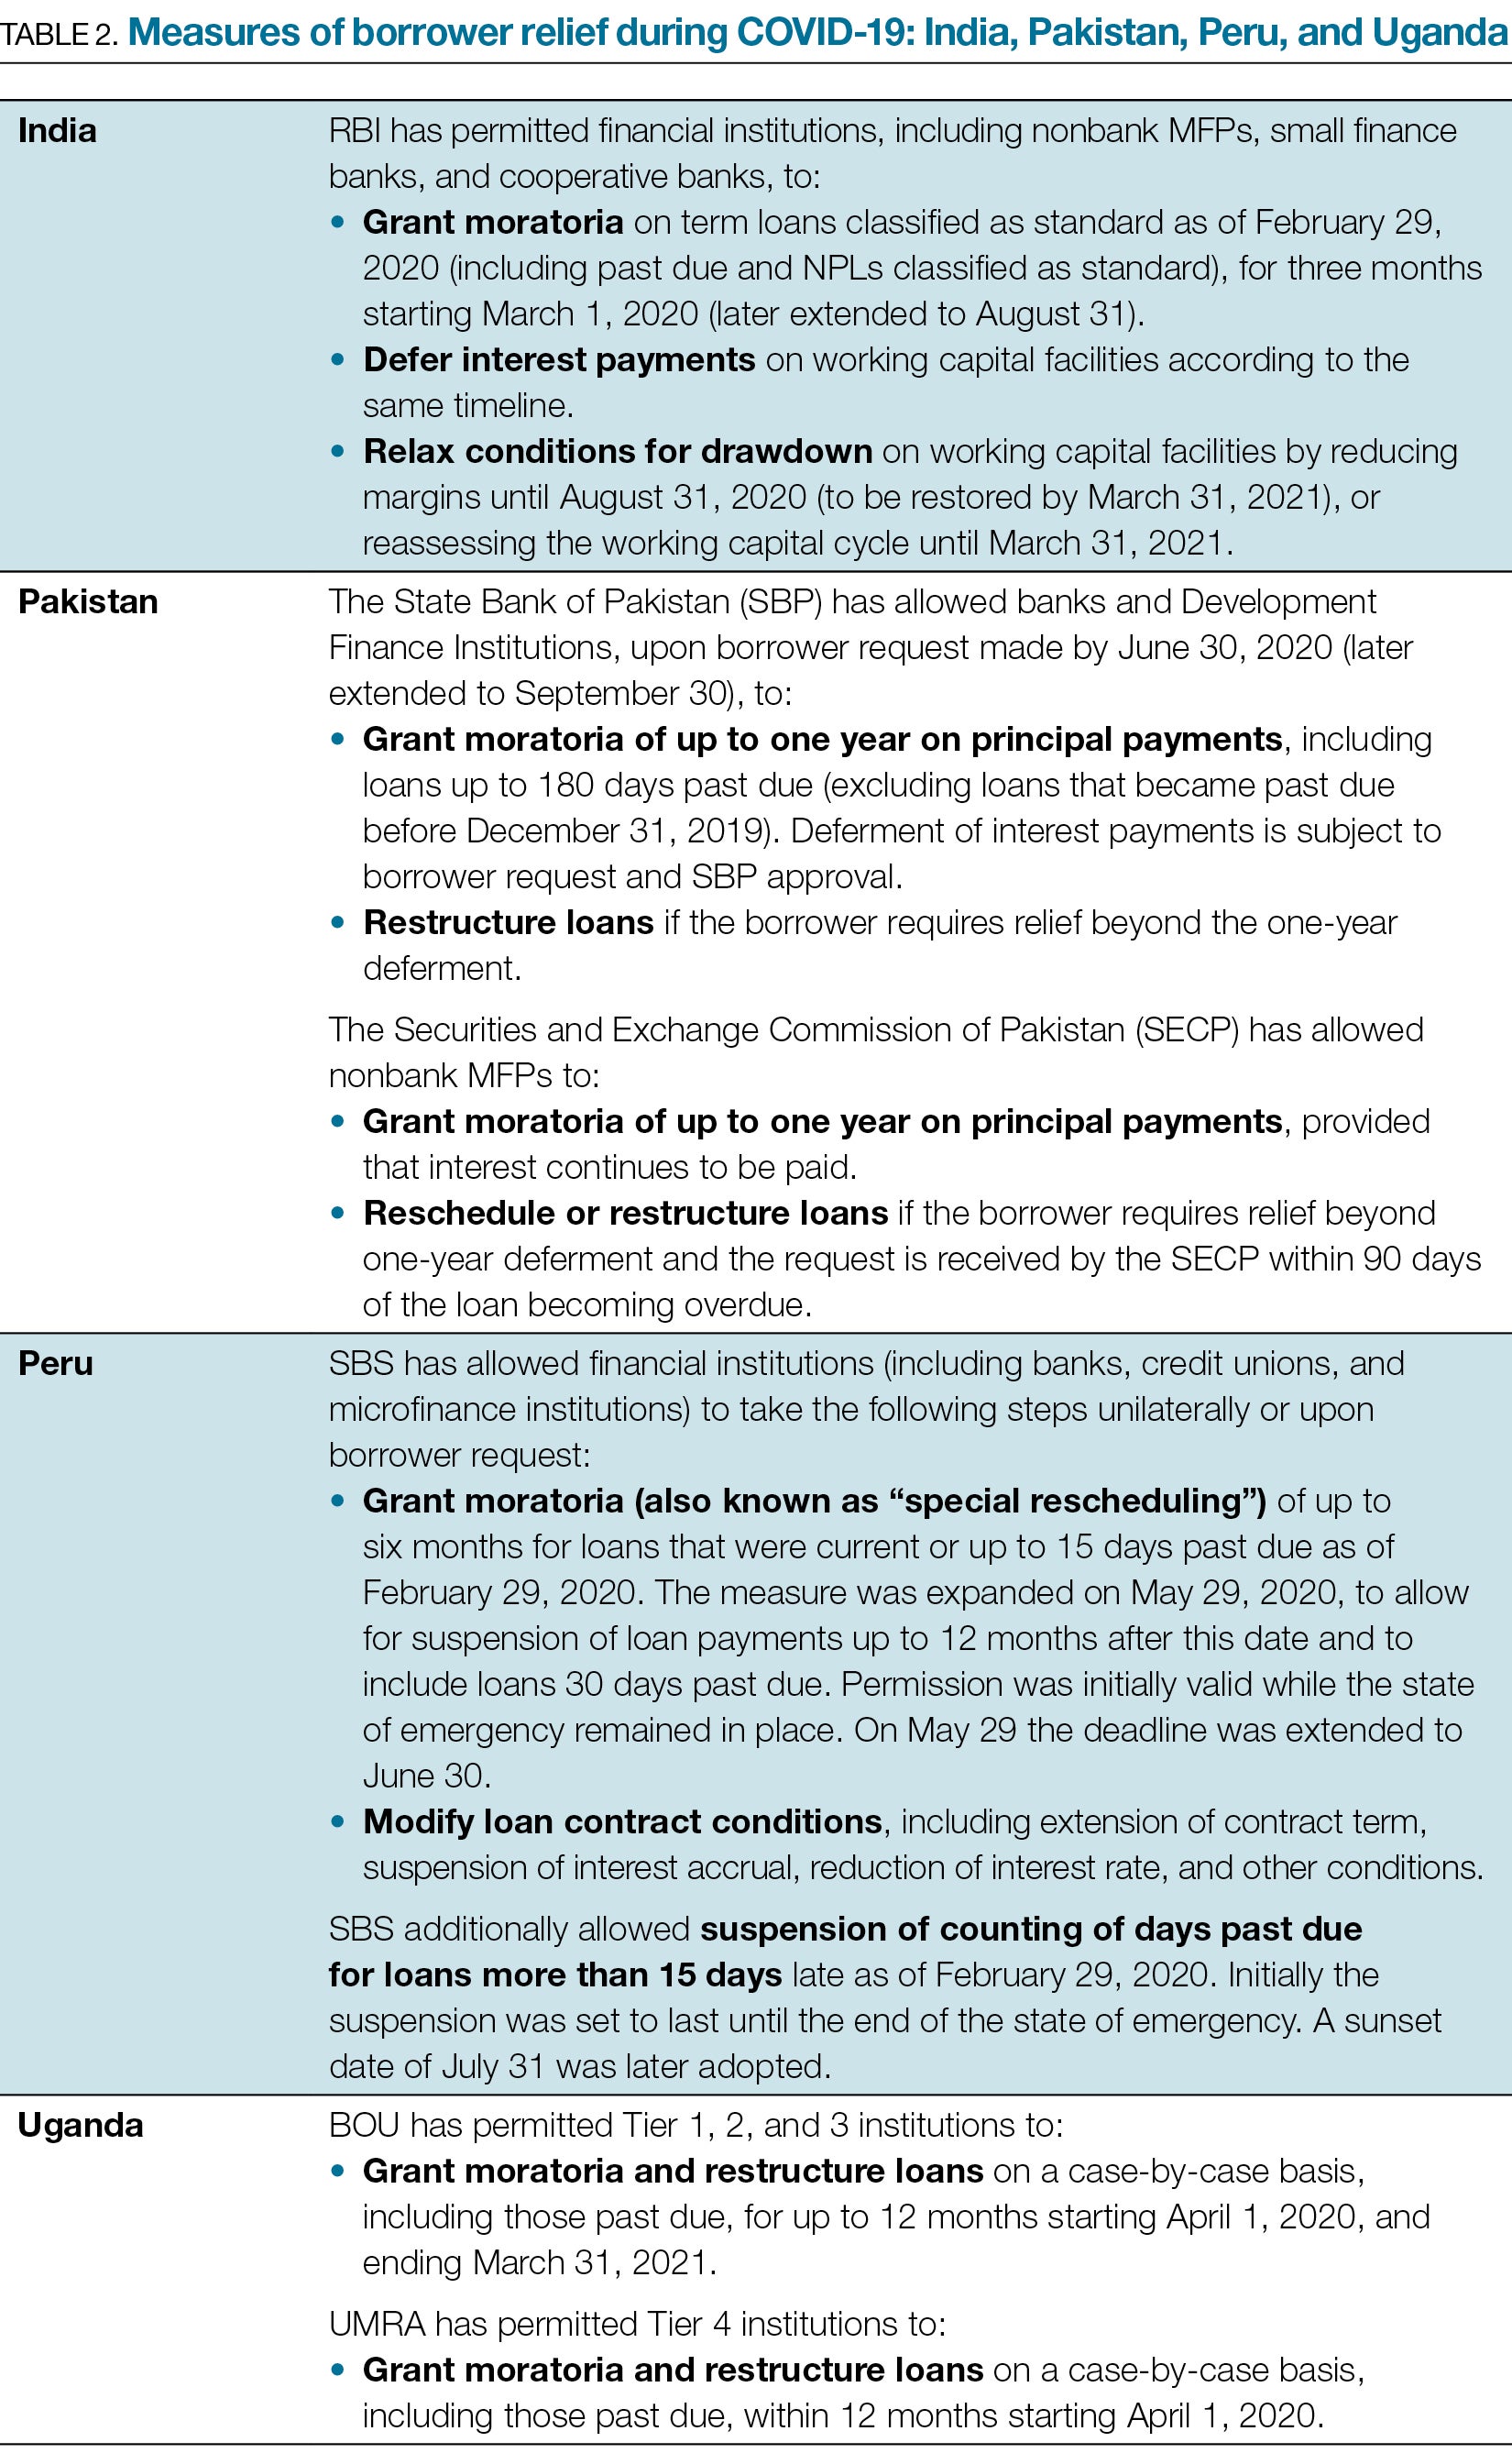 TABLE 2. Measures of borrower relief during COVID-19: India, Pakistan, Peru, and Uganda